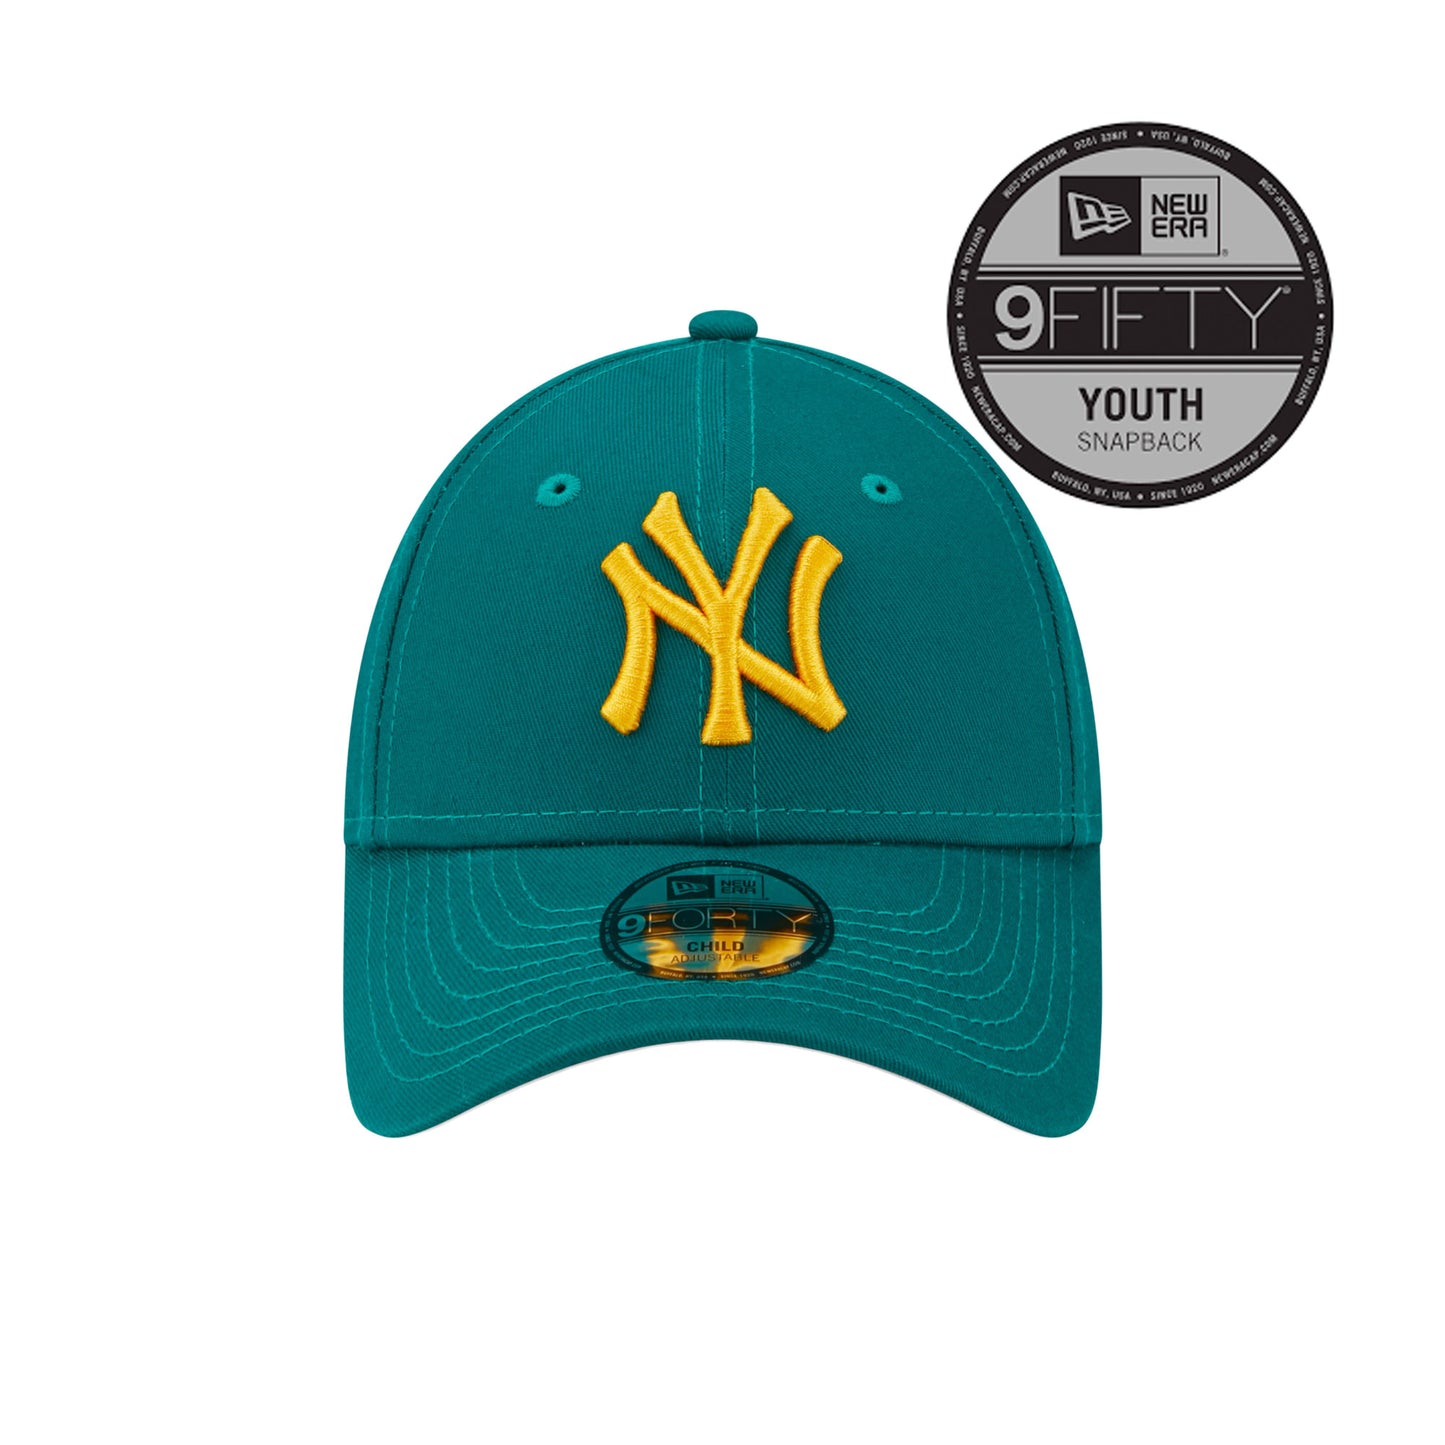 New York Yankees New Era 9FORTY YOUTH Strap back Cap green